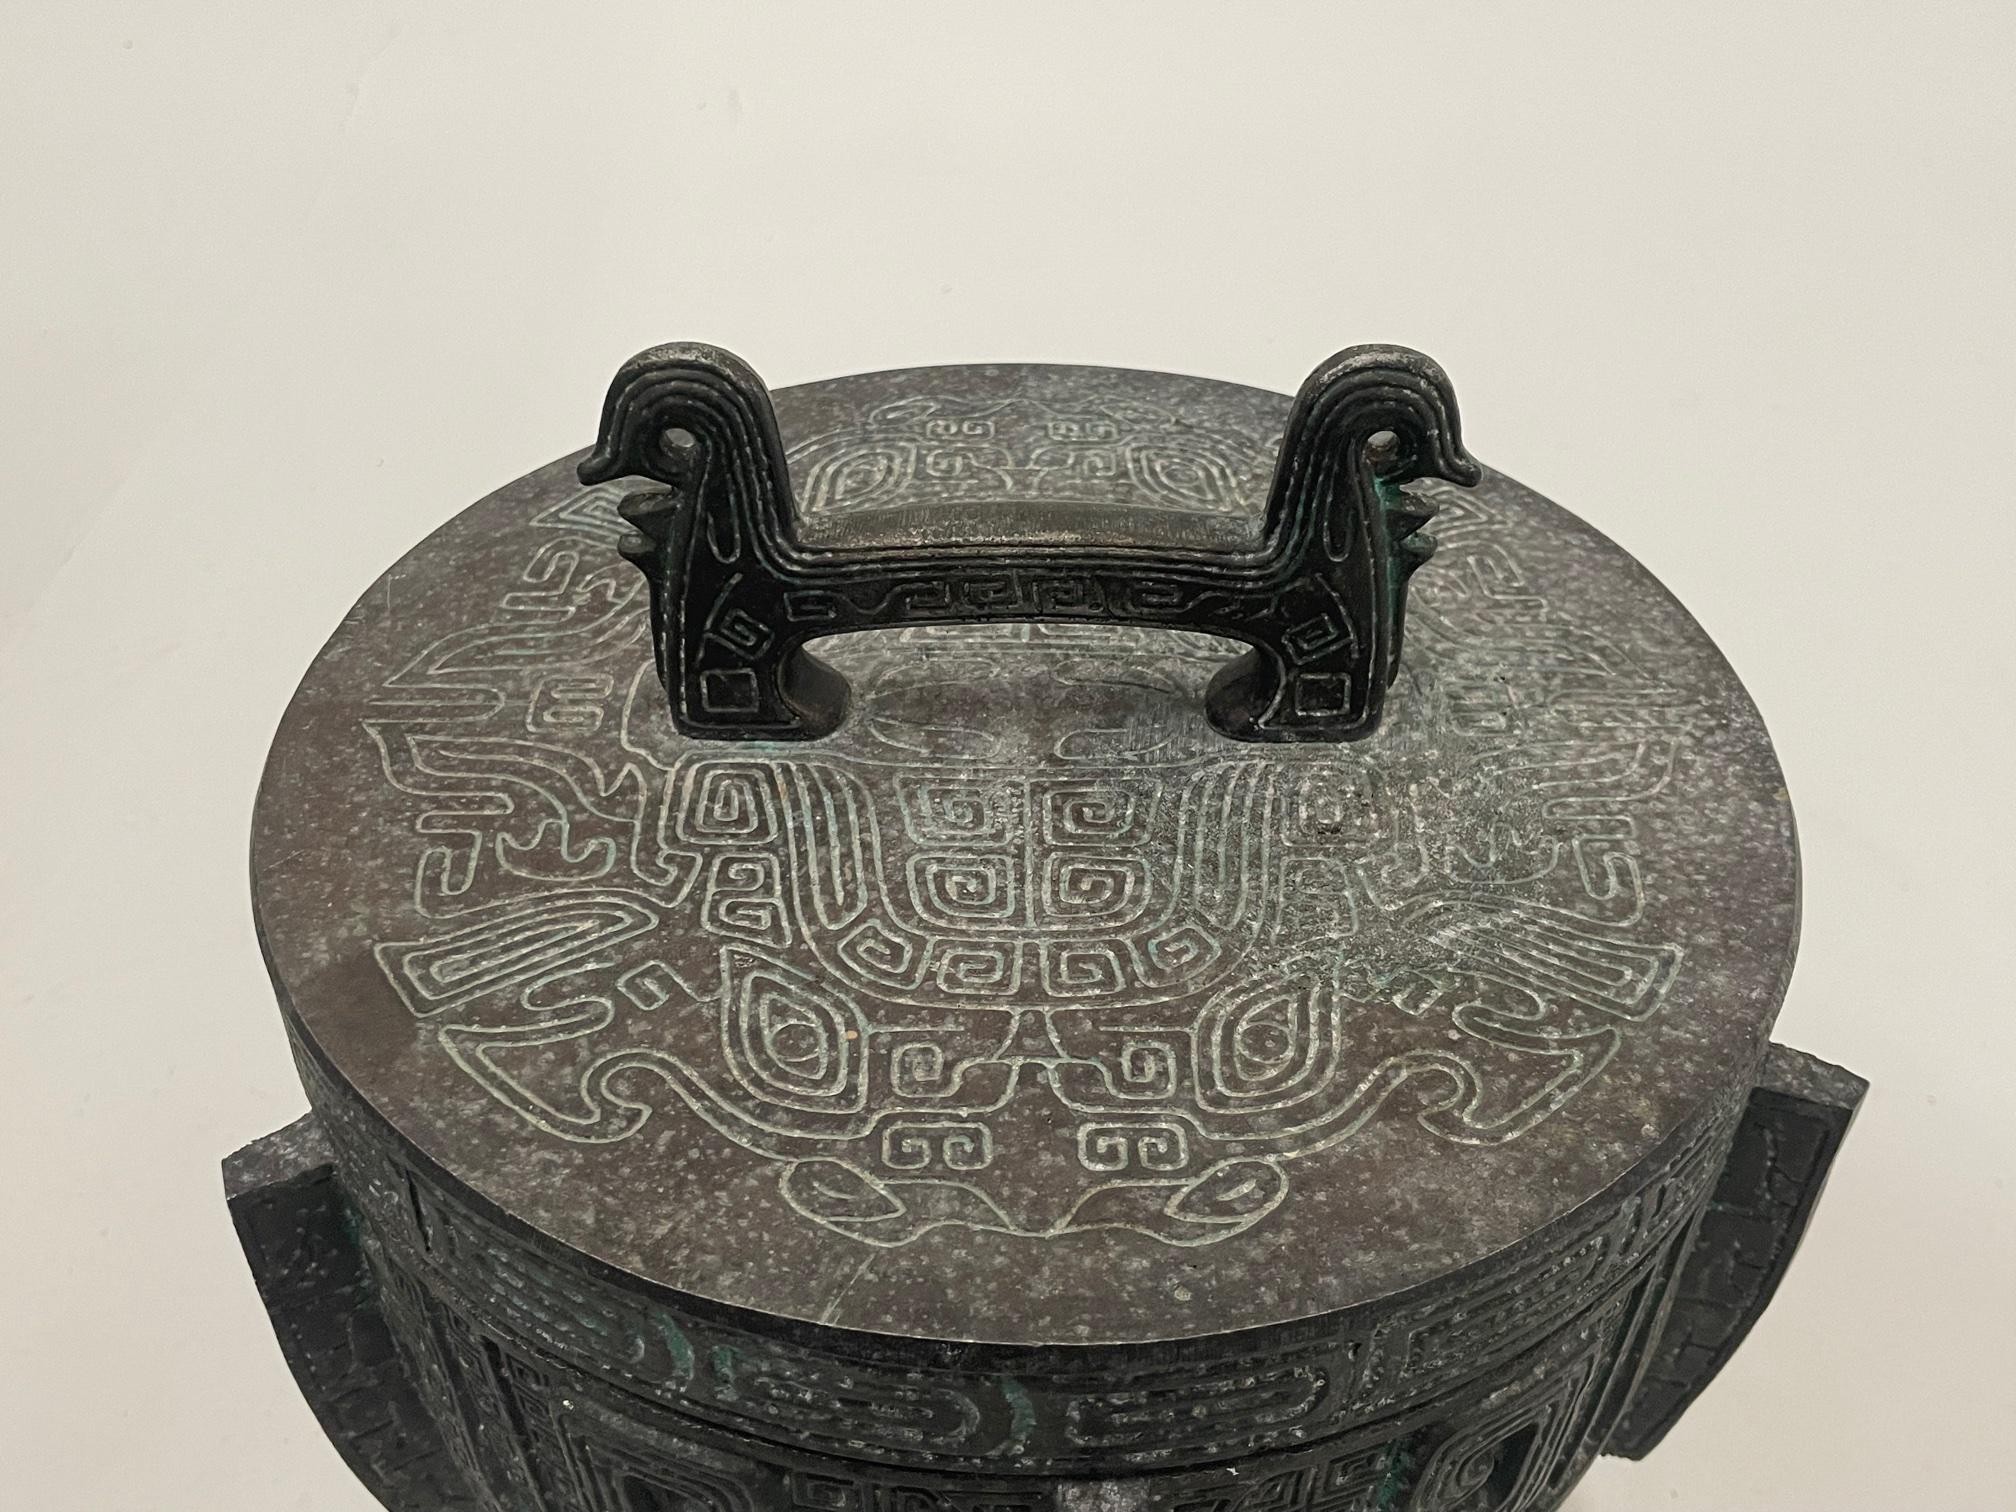 Tan France Auction Pick

Chic James Mont style cast metal ice bucket with Asian flair and a verdigris finish. There's a chrome and bright green liner.